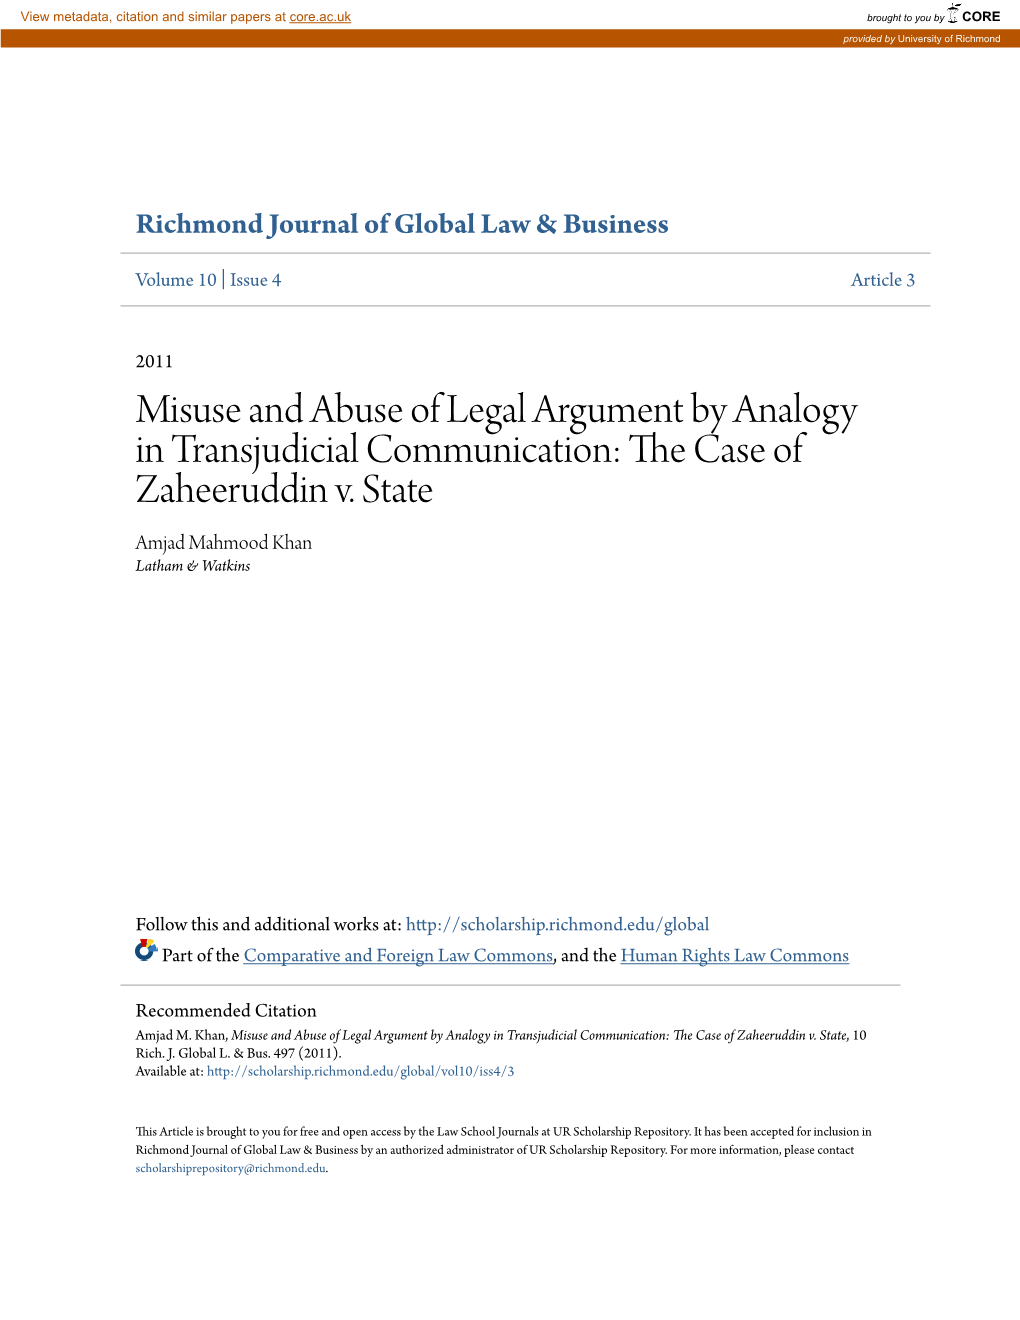 Misuse and Abuse of Legal Argument by Analogy in Transjudicial Communication: the Ac Se of Zaheeruddin V